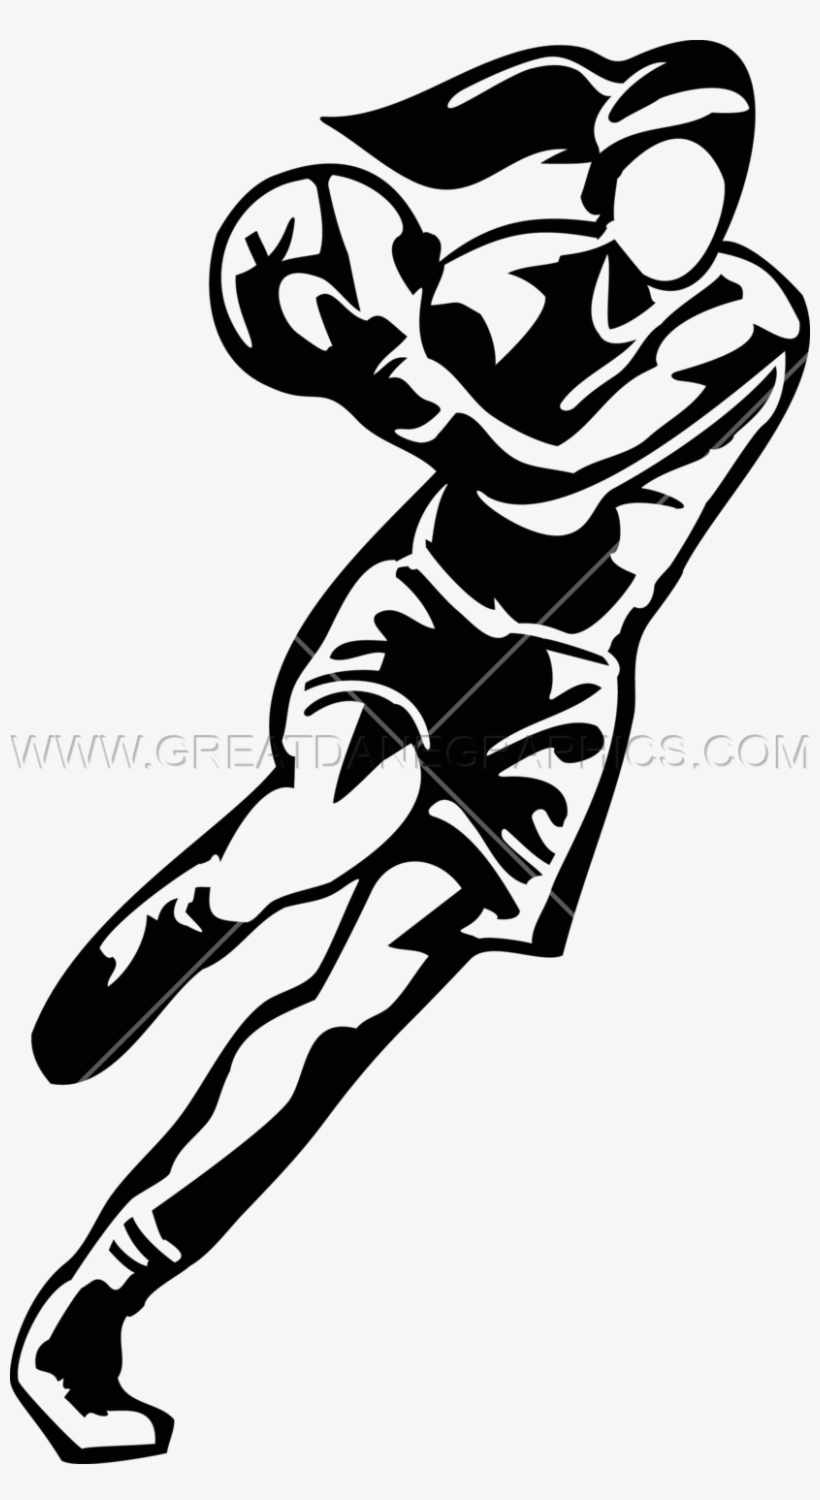 Female Basketball Player - Girls Basketball Clipart Black And White, transparent png #6066912